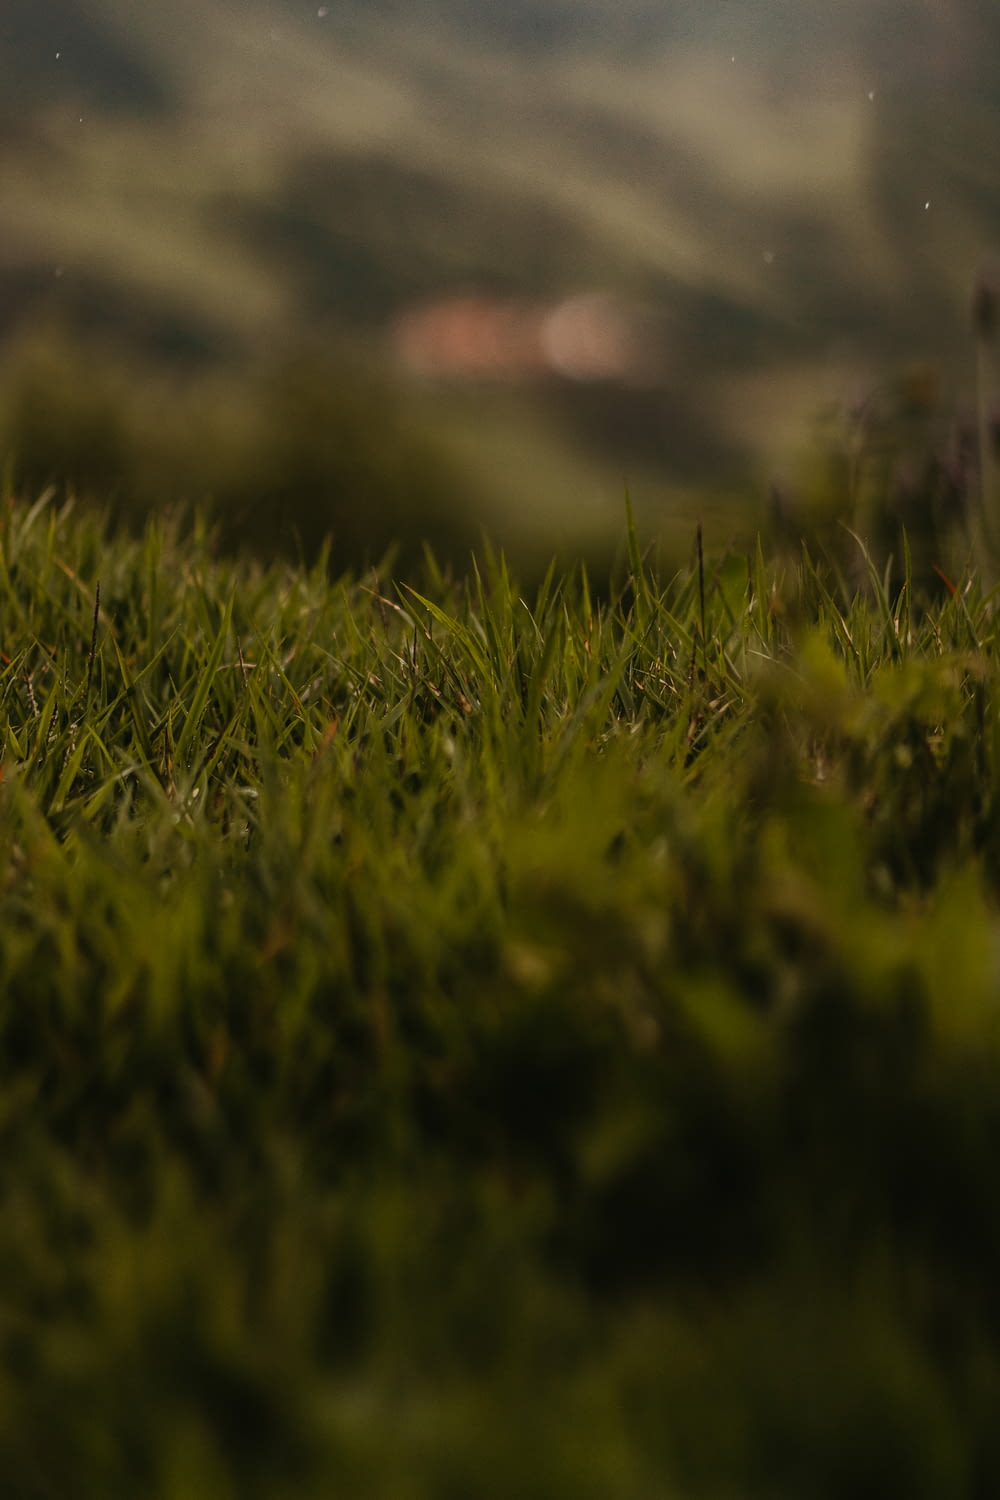 a blurry photo of grass with a blurry background